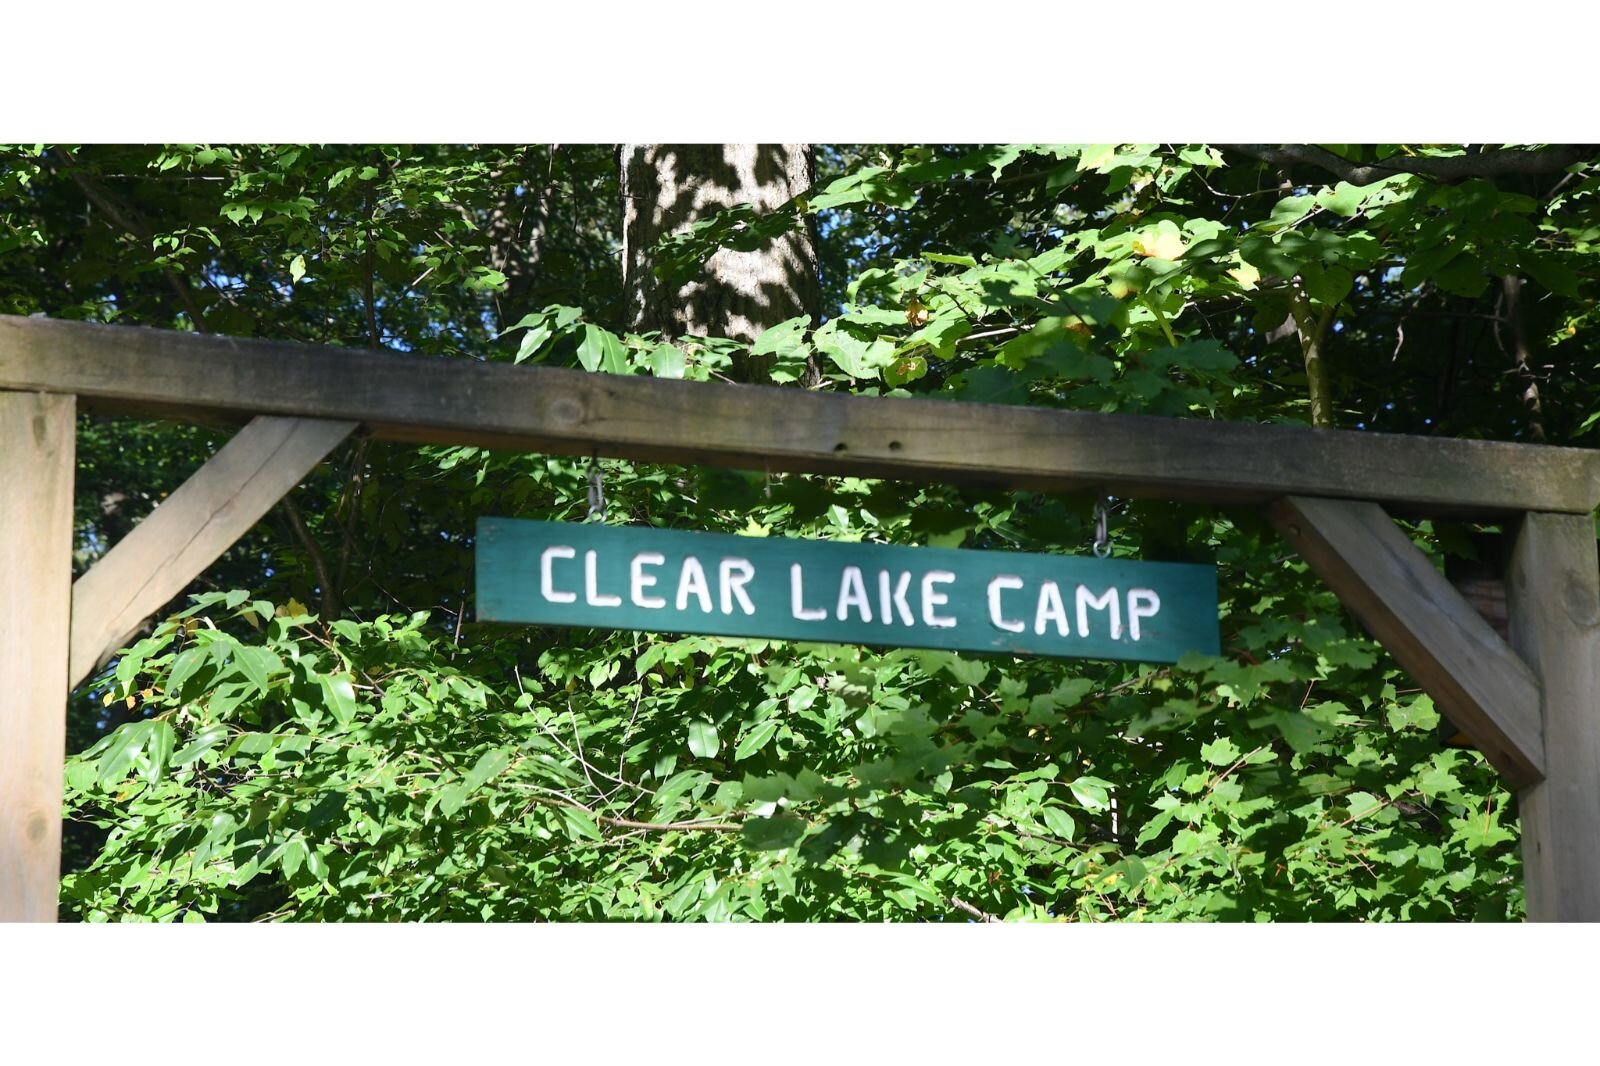 The Battle Creek Outdoor Education Center is located at Clear Lake Camp in Barry County.